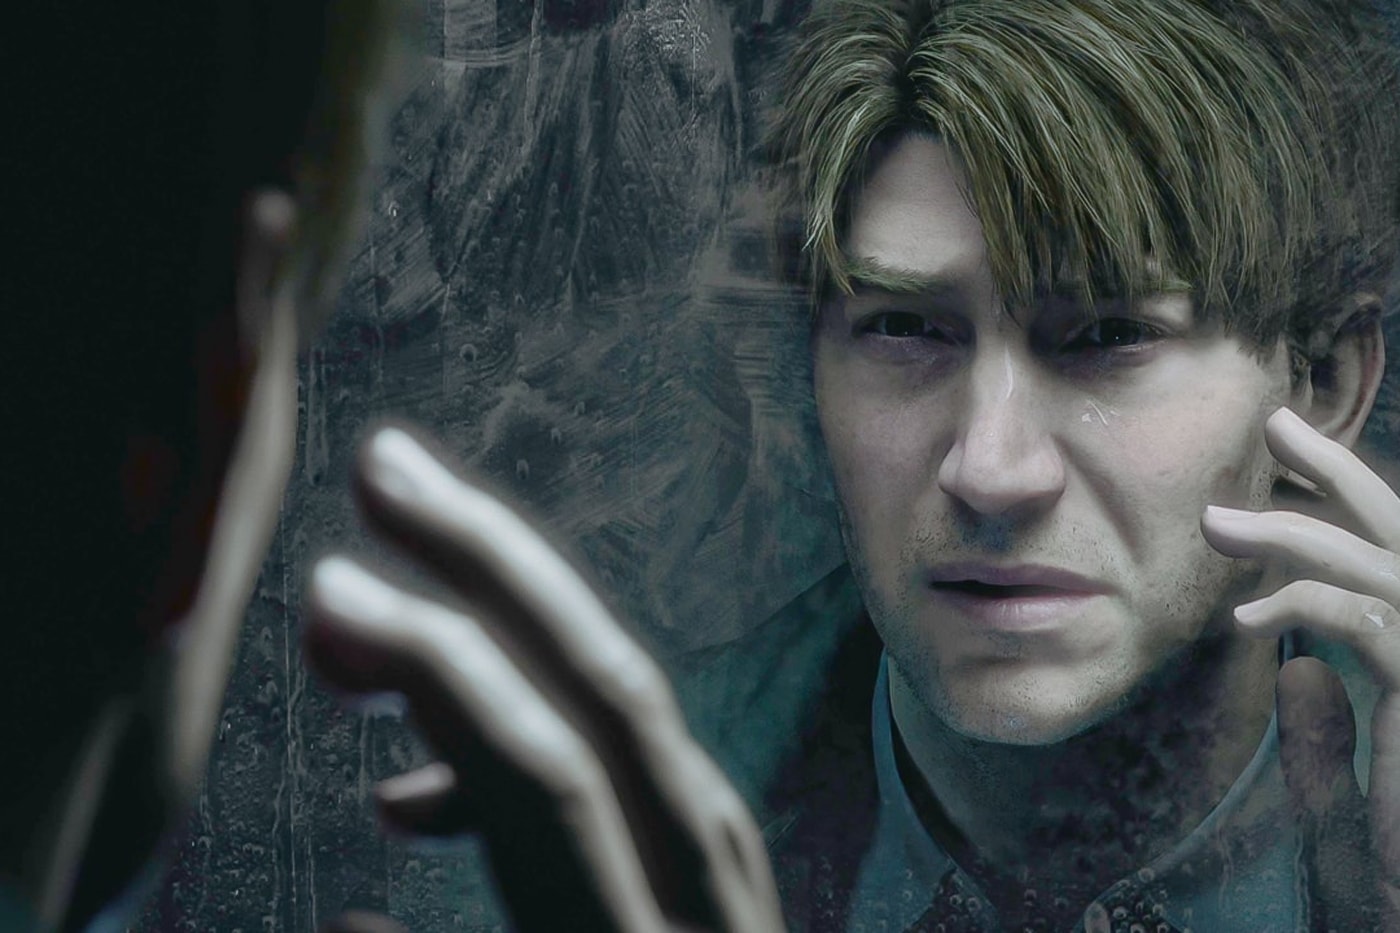 So, what was the supposed Lore behind the canceled Silent Hills